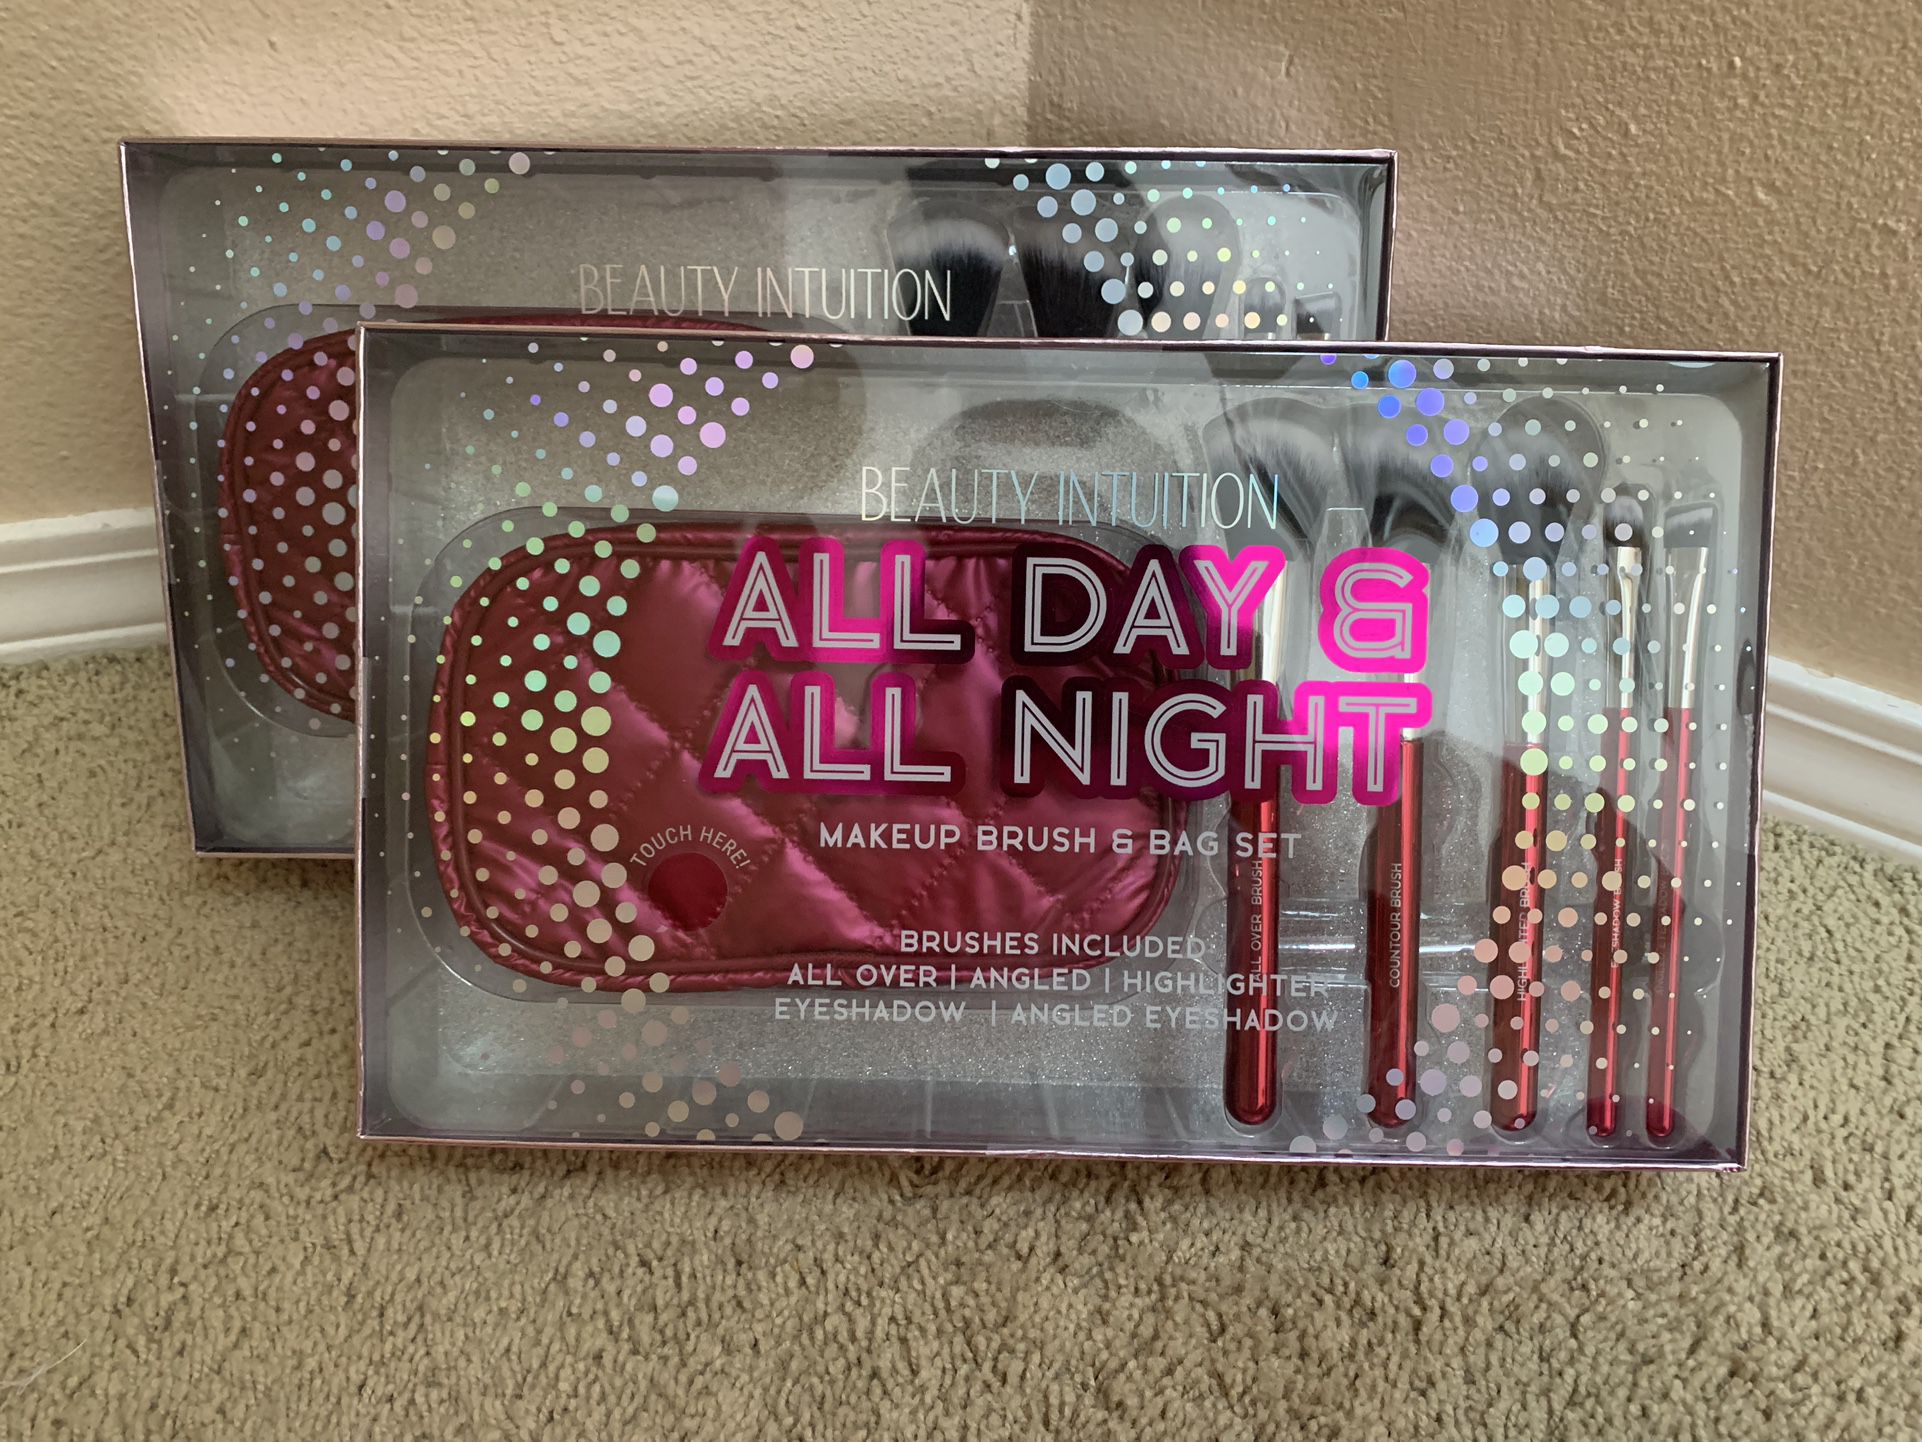 New Beauty Intuition All Day And Night Makeup Brush And Bag Set